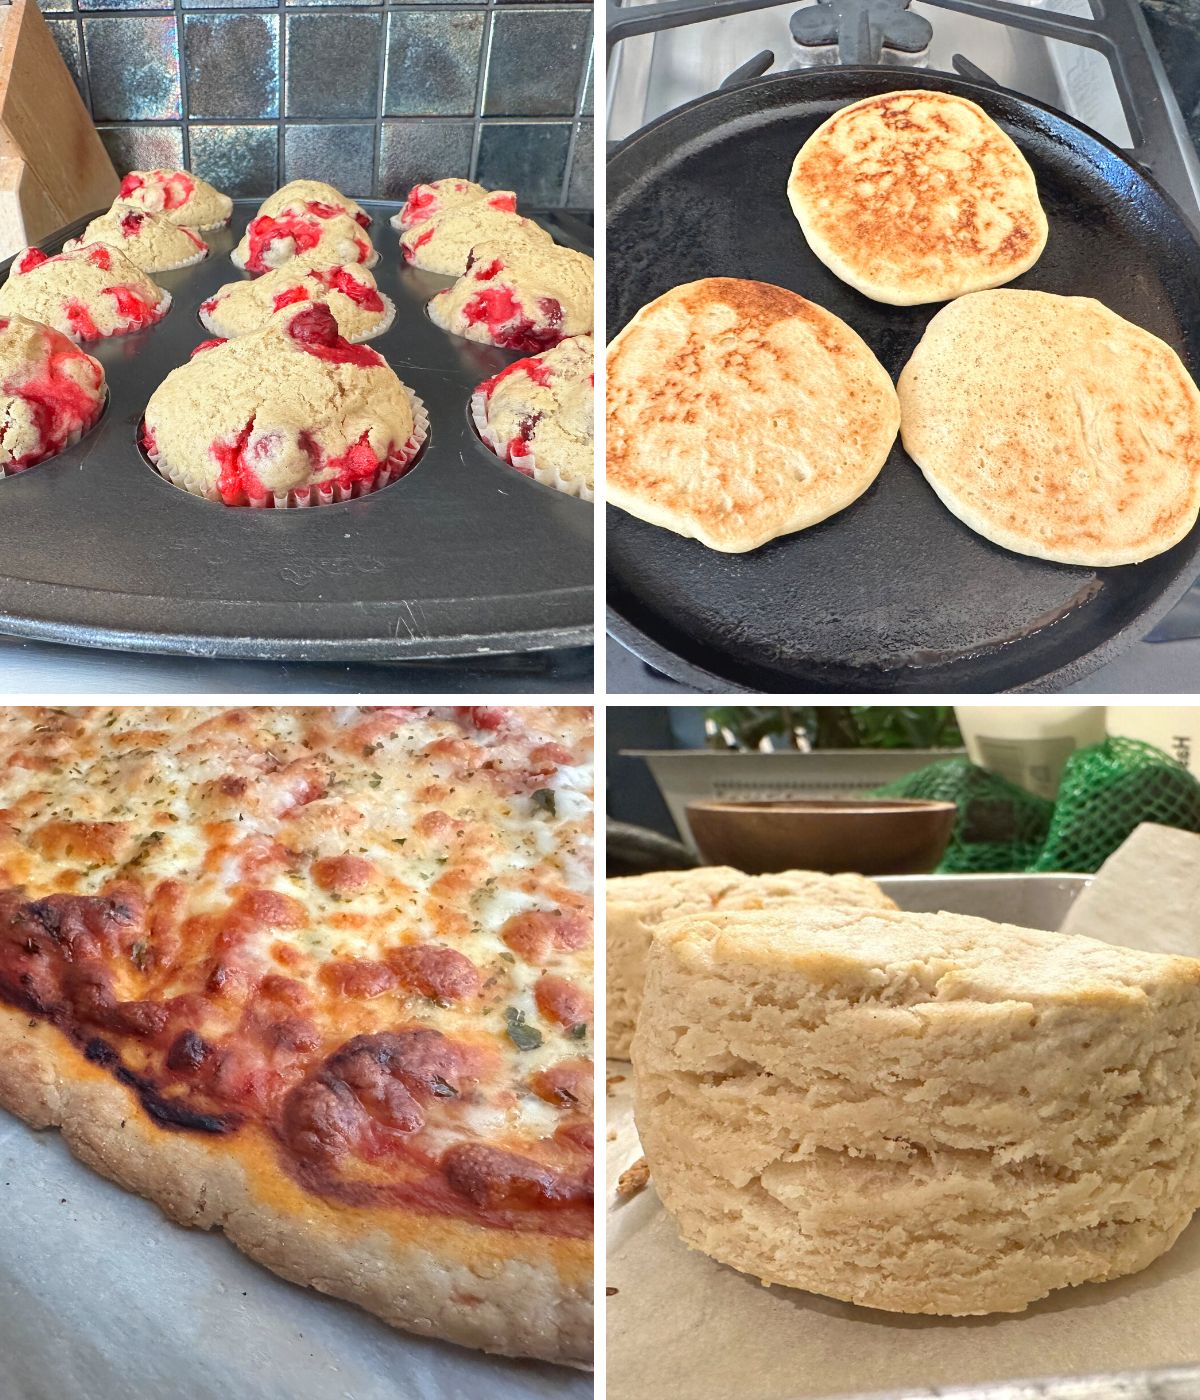 Four photos of recipe tests. Gluten free muffins, pancakes, pizza, and biscuits.